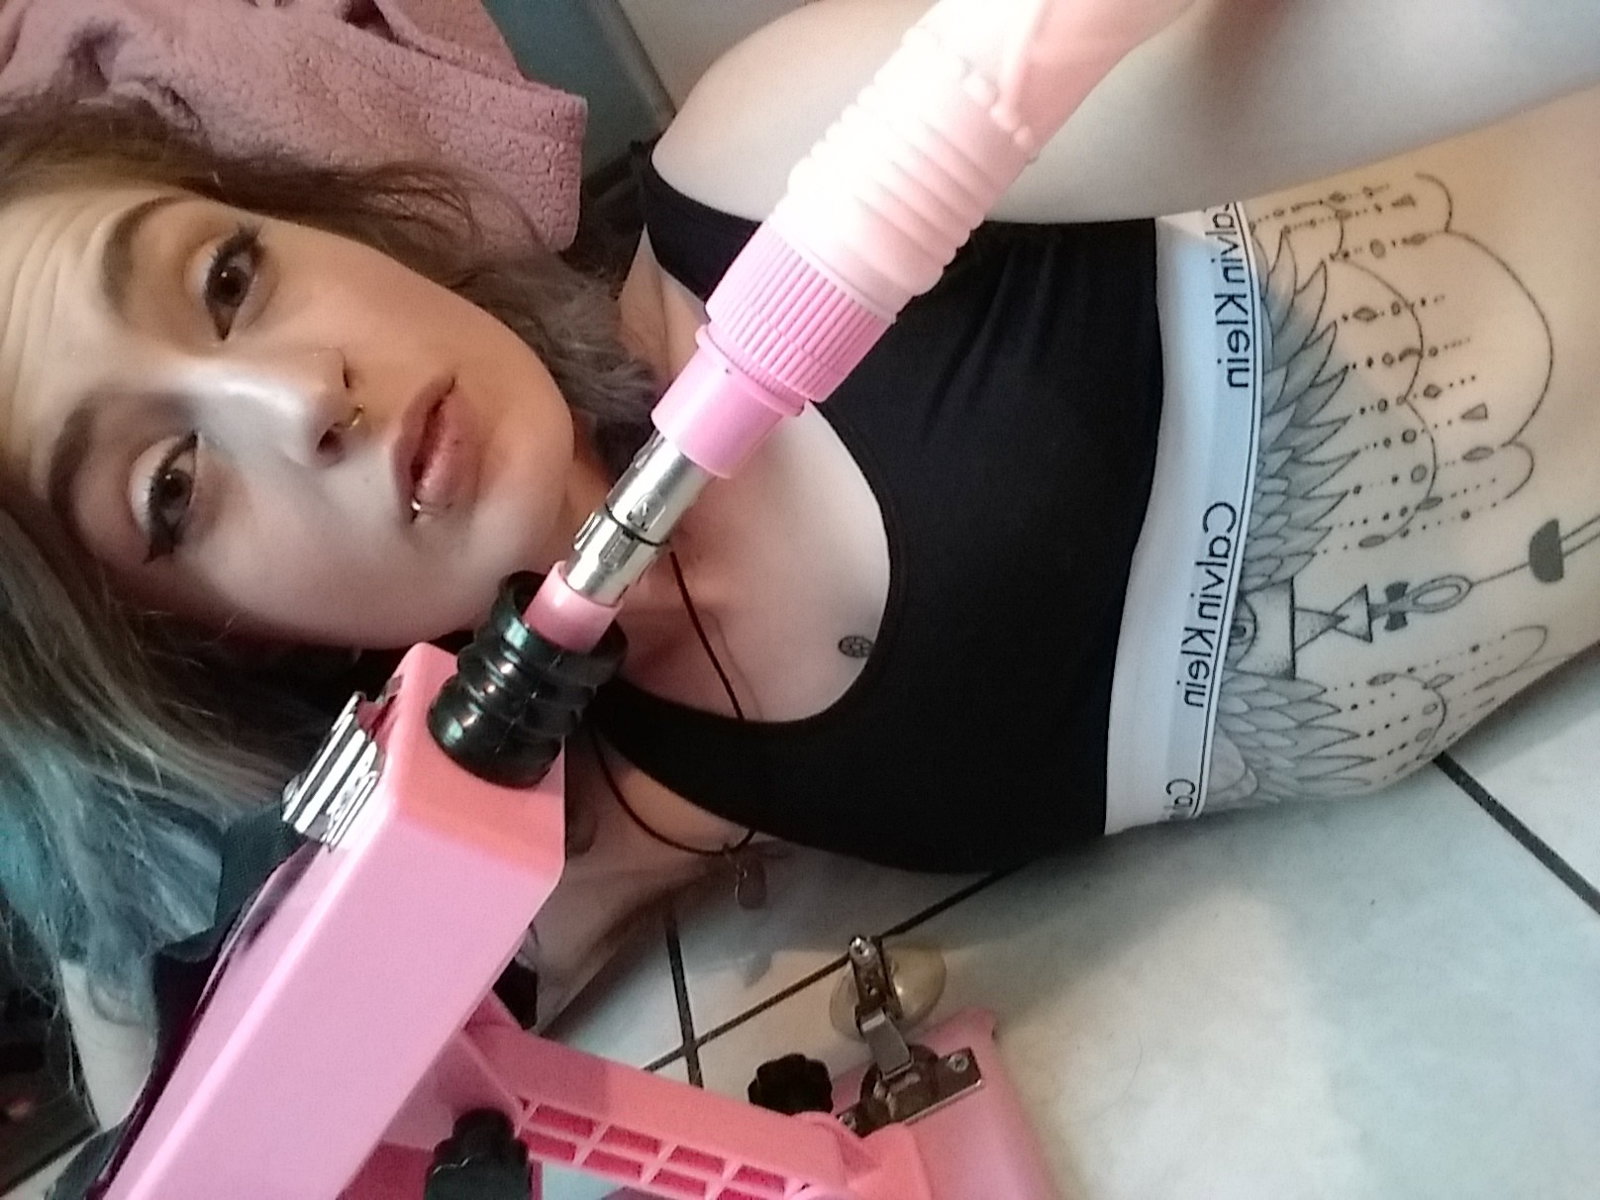 Watch the Photo by Mystic Moon Princess with the username @MysticMoonPrincess, who is a star user, posted on July 18, 2019 and the text says 'New content coming soon!! Follow me over on manyvids to see it first! 
#mvgirl #manyvids #fuckmachine #blowjob #amateur #amature #buymedrugsnotjewelry #mysticmoonprincess #babe #tattoo #tattooedwomen #hot #solo #masturbation'